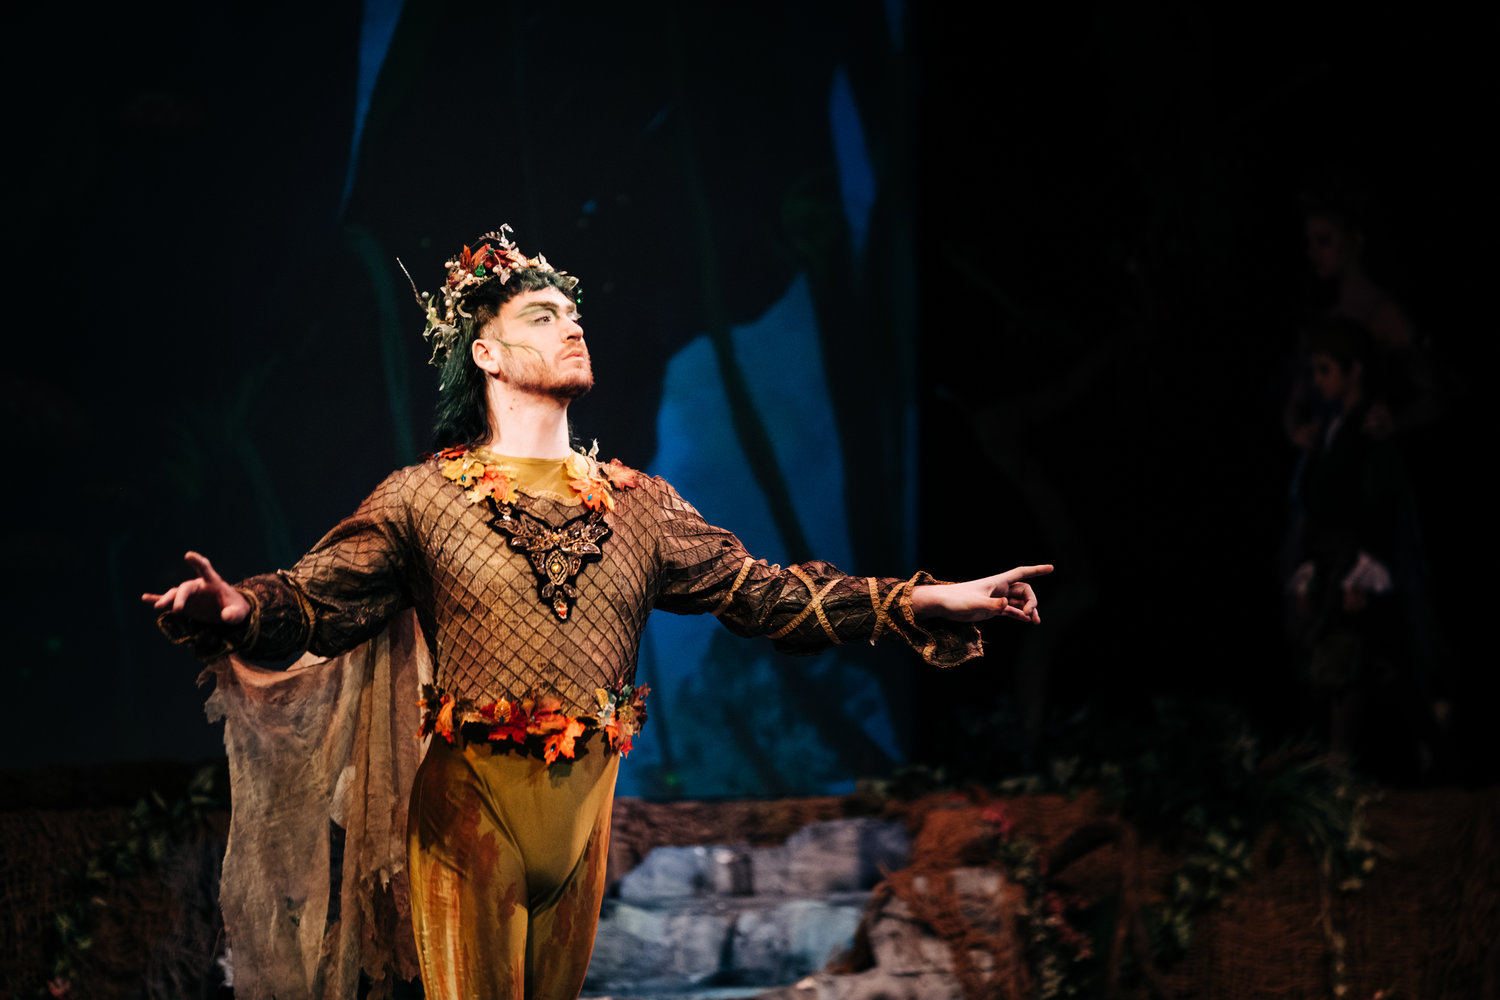 Oberon, king of the fairies, played by Elijah Ochoa, performs on stage during Midwest Regional Ballet’s performance of “A Midsummer Night’s Dream” at Memorial Auditorium on Saturday, April 23.